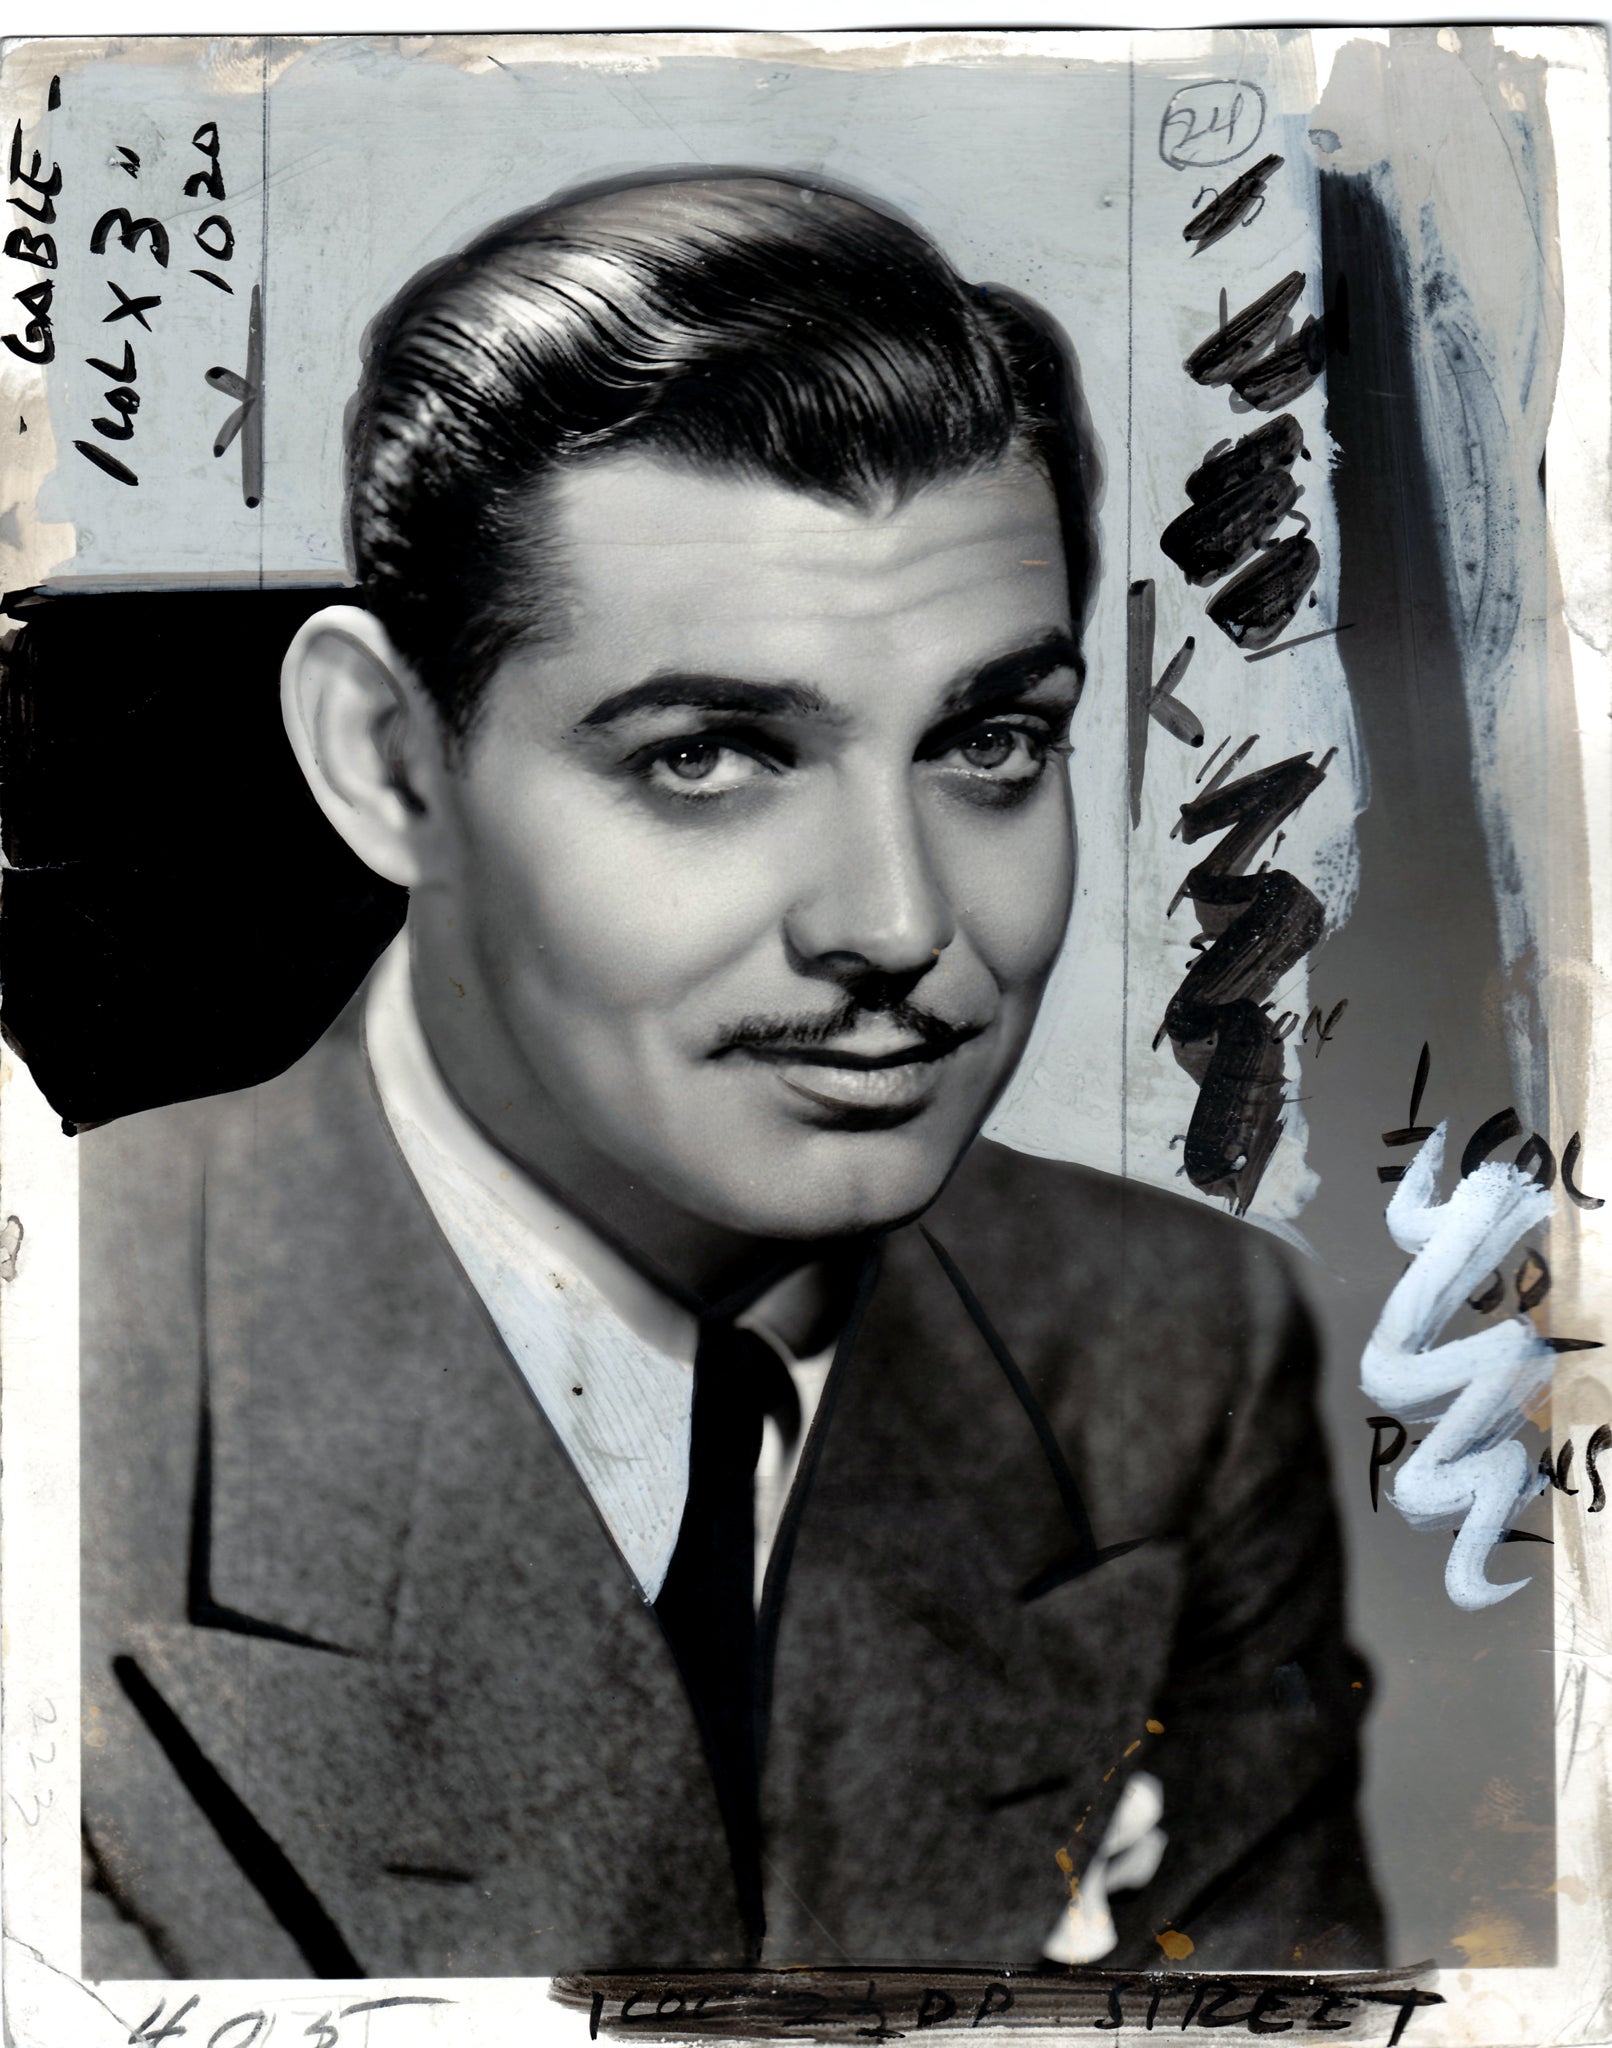 Not even Clark Gable is this handsome without a bit of help.